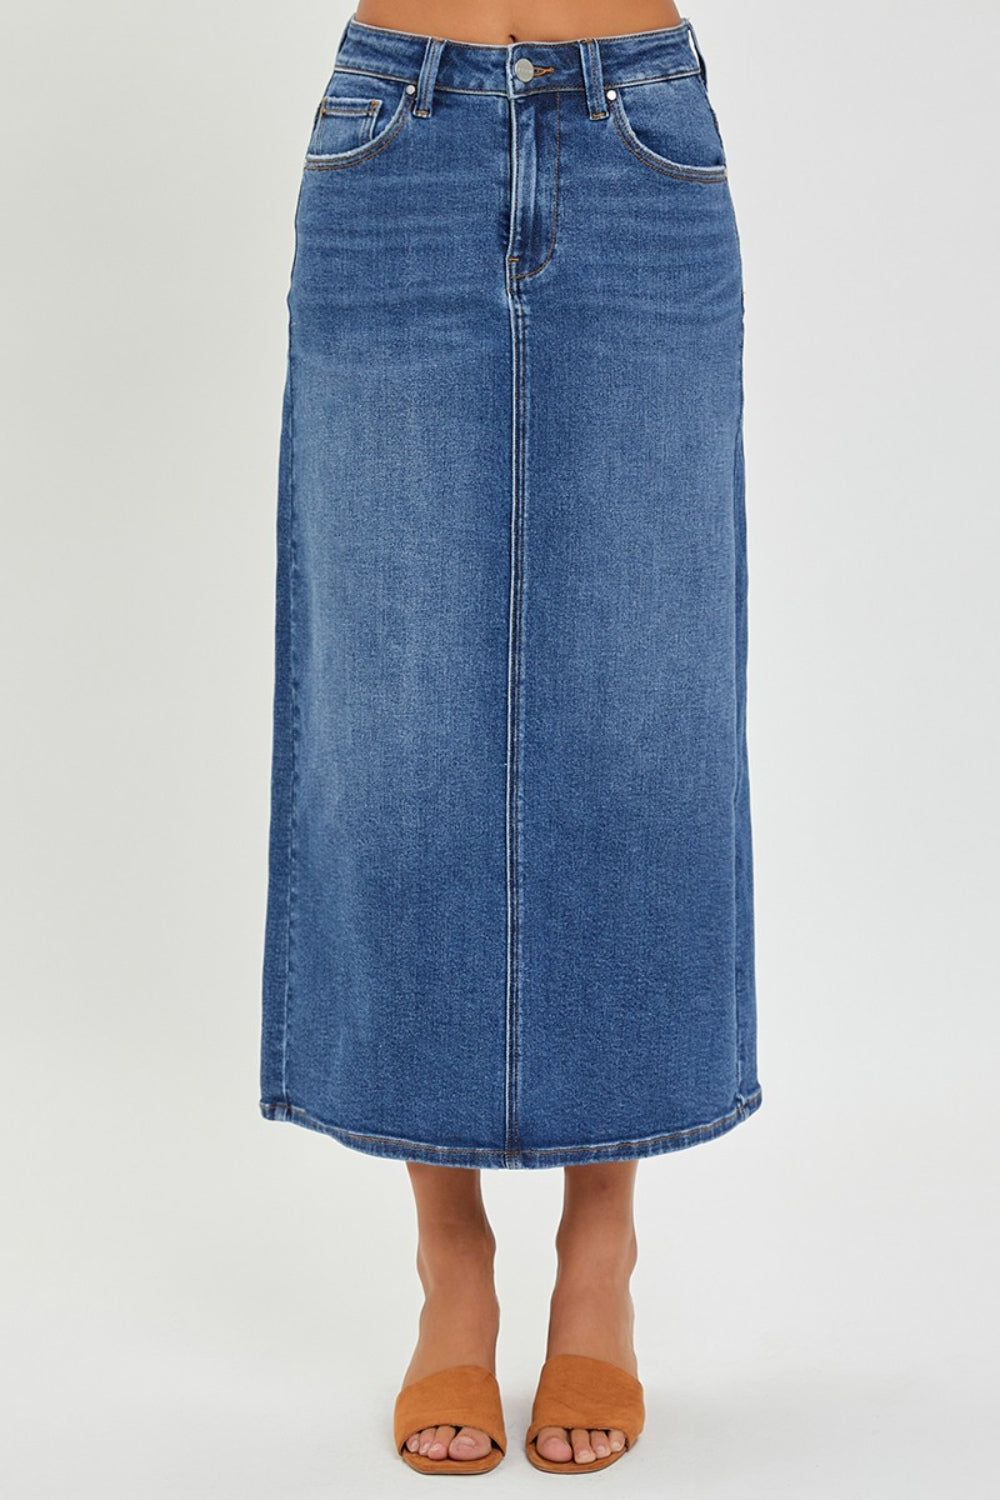 The High Rise Back Slit Denim Skirt is a stylish and versatile addition to your wardrobe. Made from high-quality denim, this skirt features a high-rise waist and a trendy back slit detail. Pair it with a tucked-in blouse and heels for a chic look, or dress it down with a graphic tee and sneakers for a more casual vibe. S  - XL